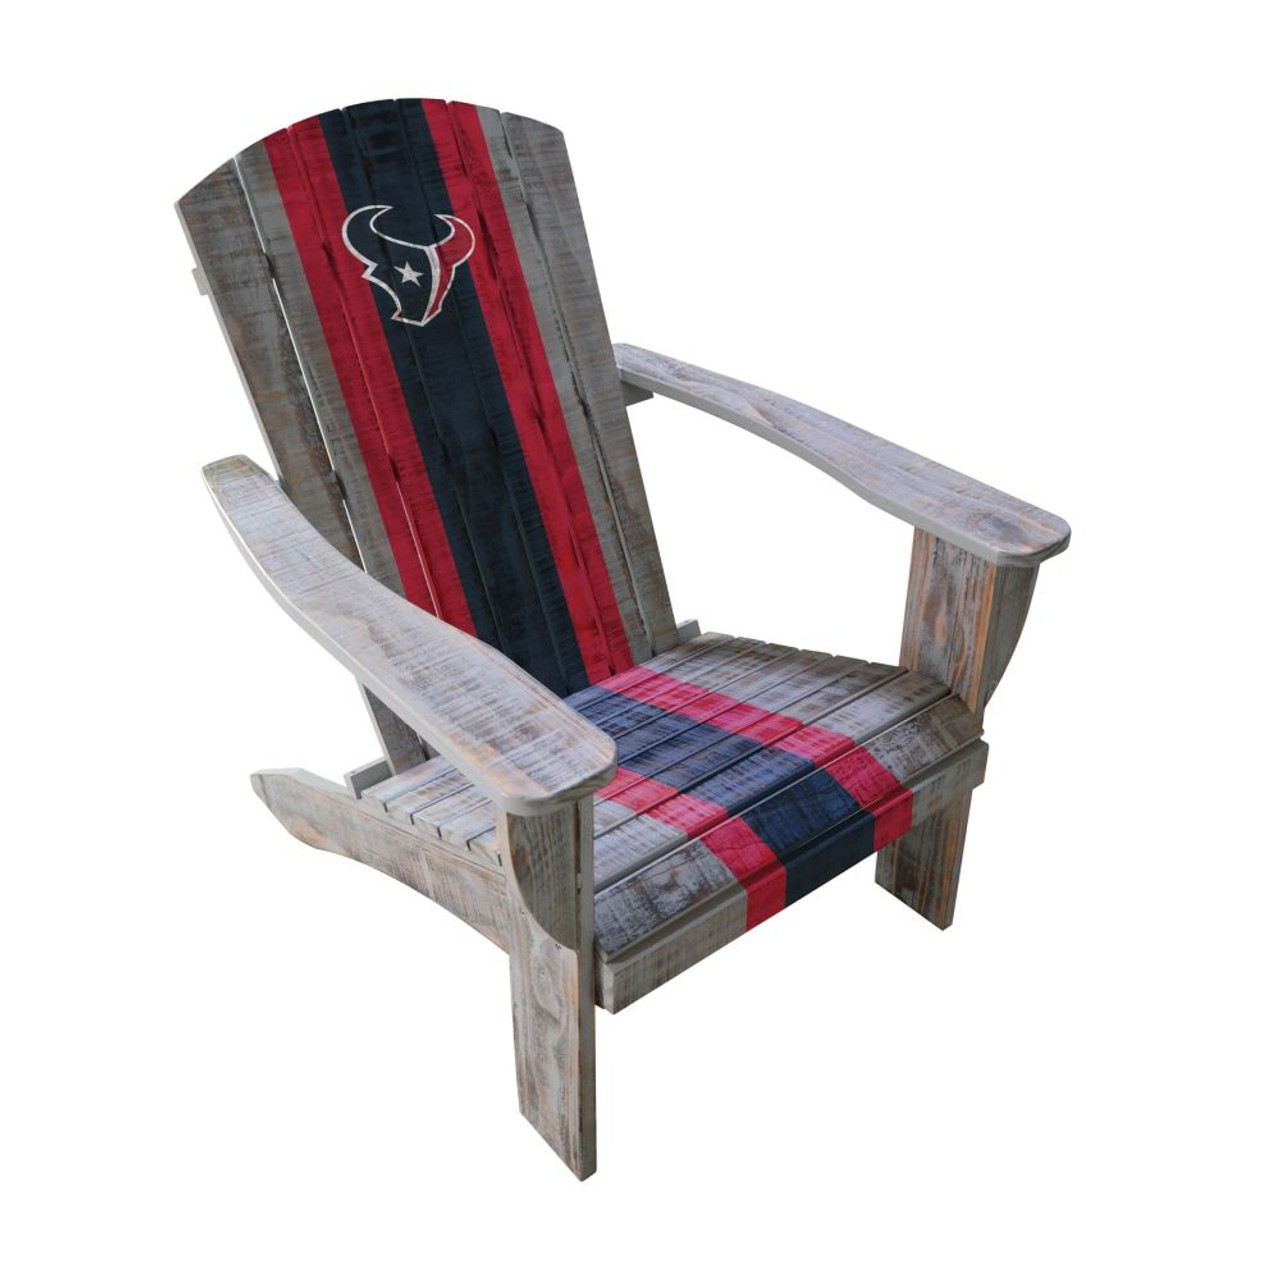 511-1034, Houston, Texans, Wood, Adirondack, Chair, NFL, Imperial, FREE SHIPPING, 720801110349